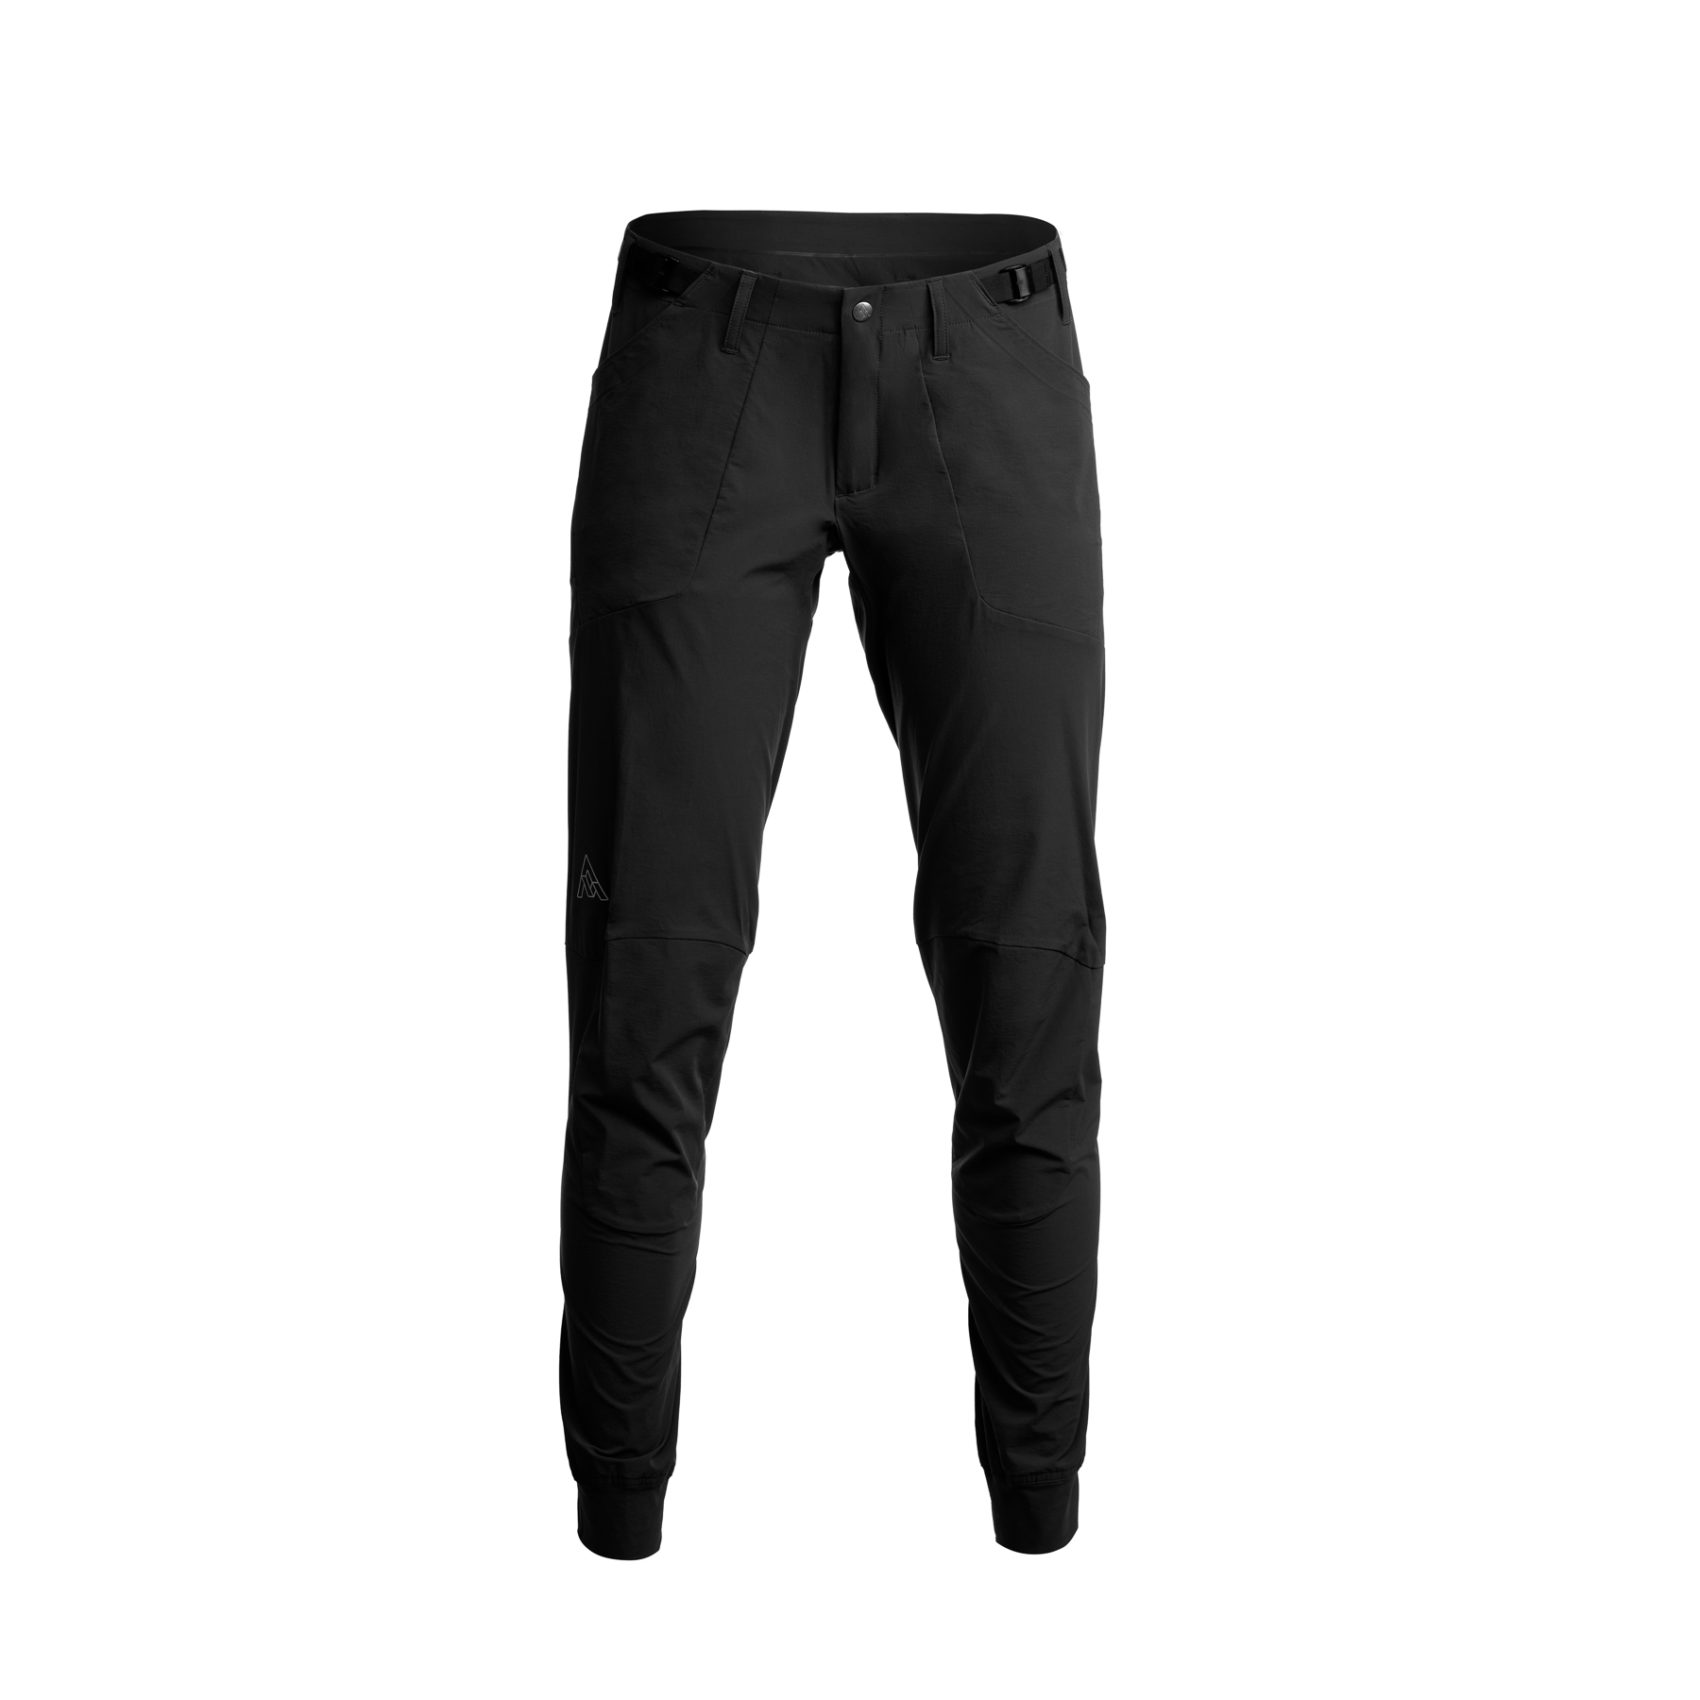 7Mesh Apparel Autumn 2021 Collection Womens Glidepath Pants